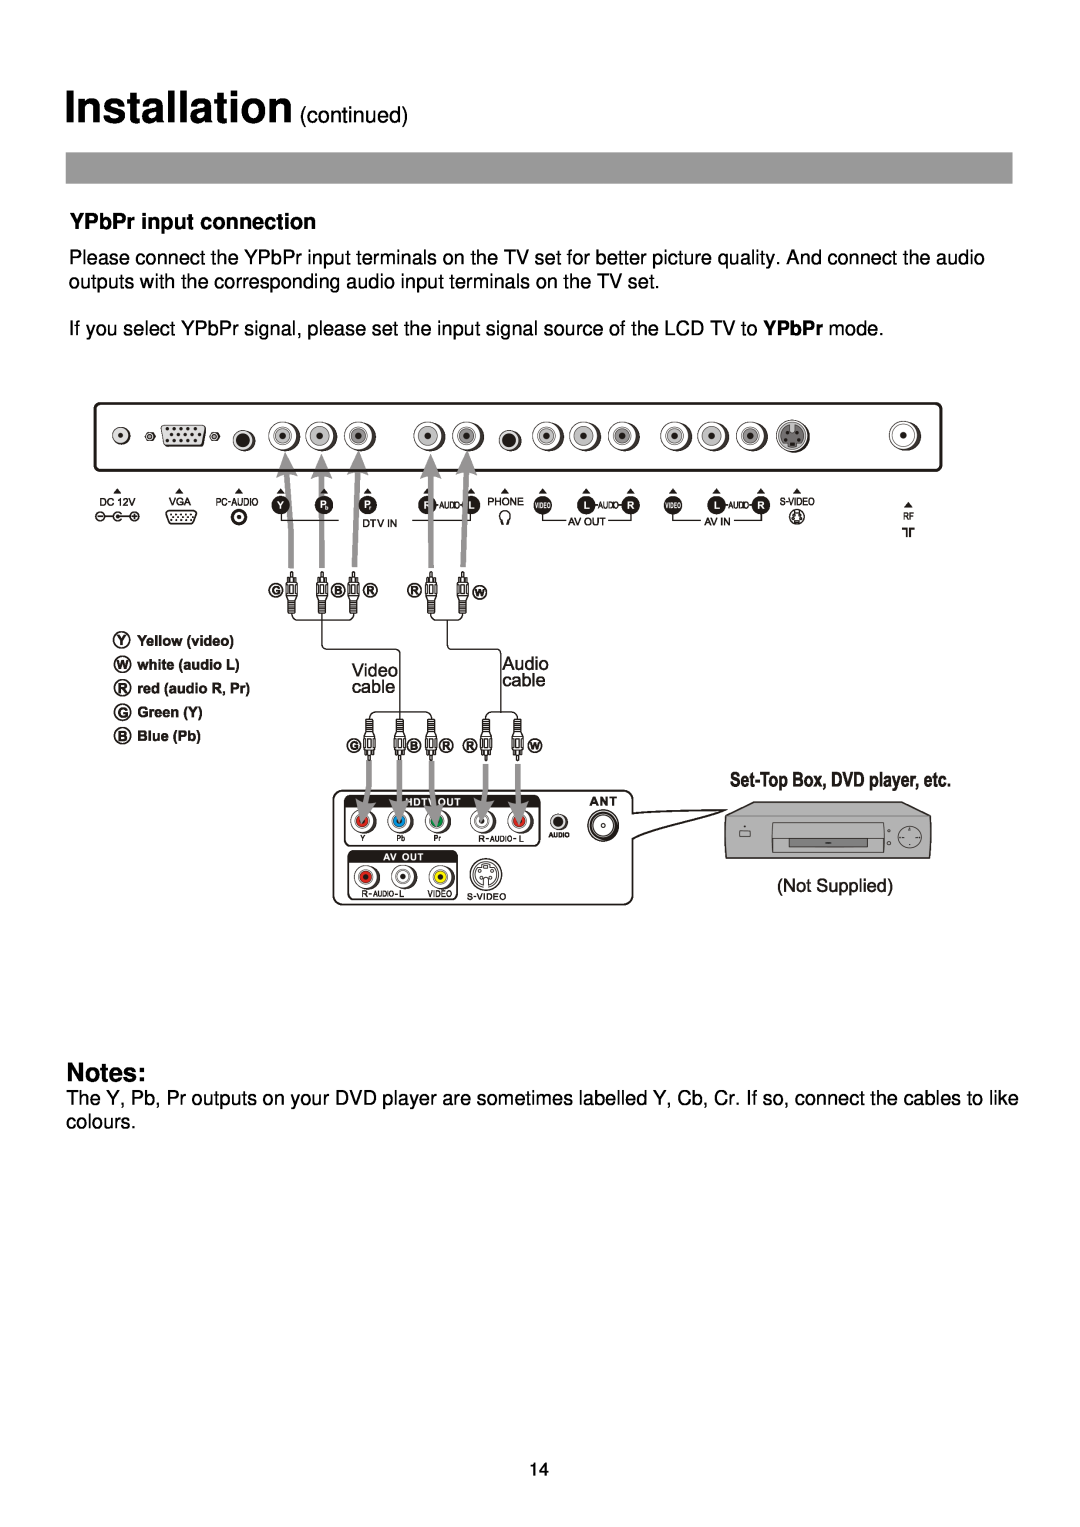 Palsonic TFTV515 owner manual Installation continued, YPbPr input connection 